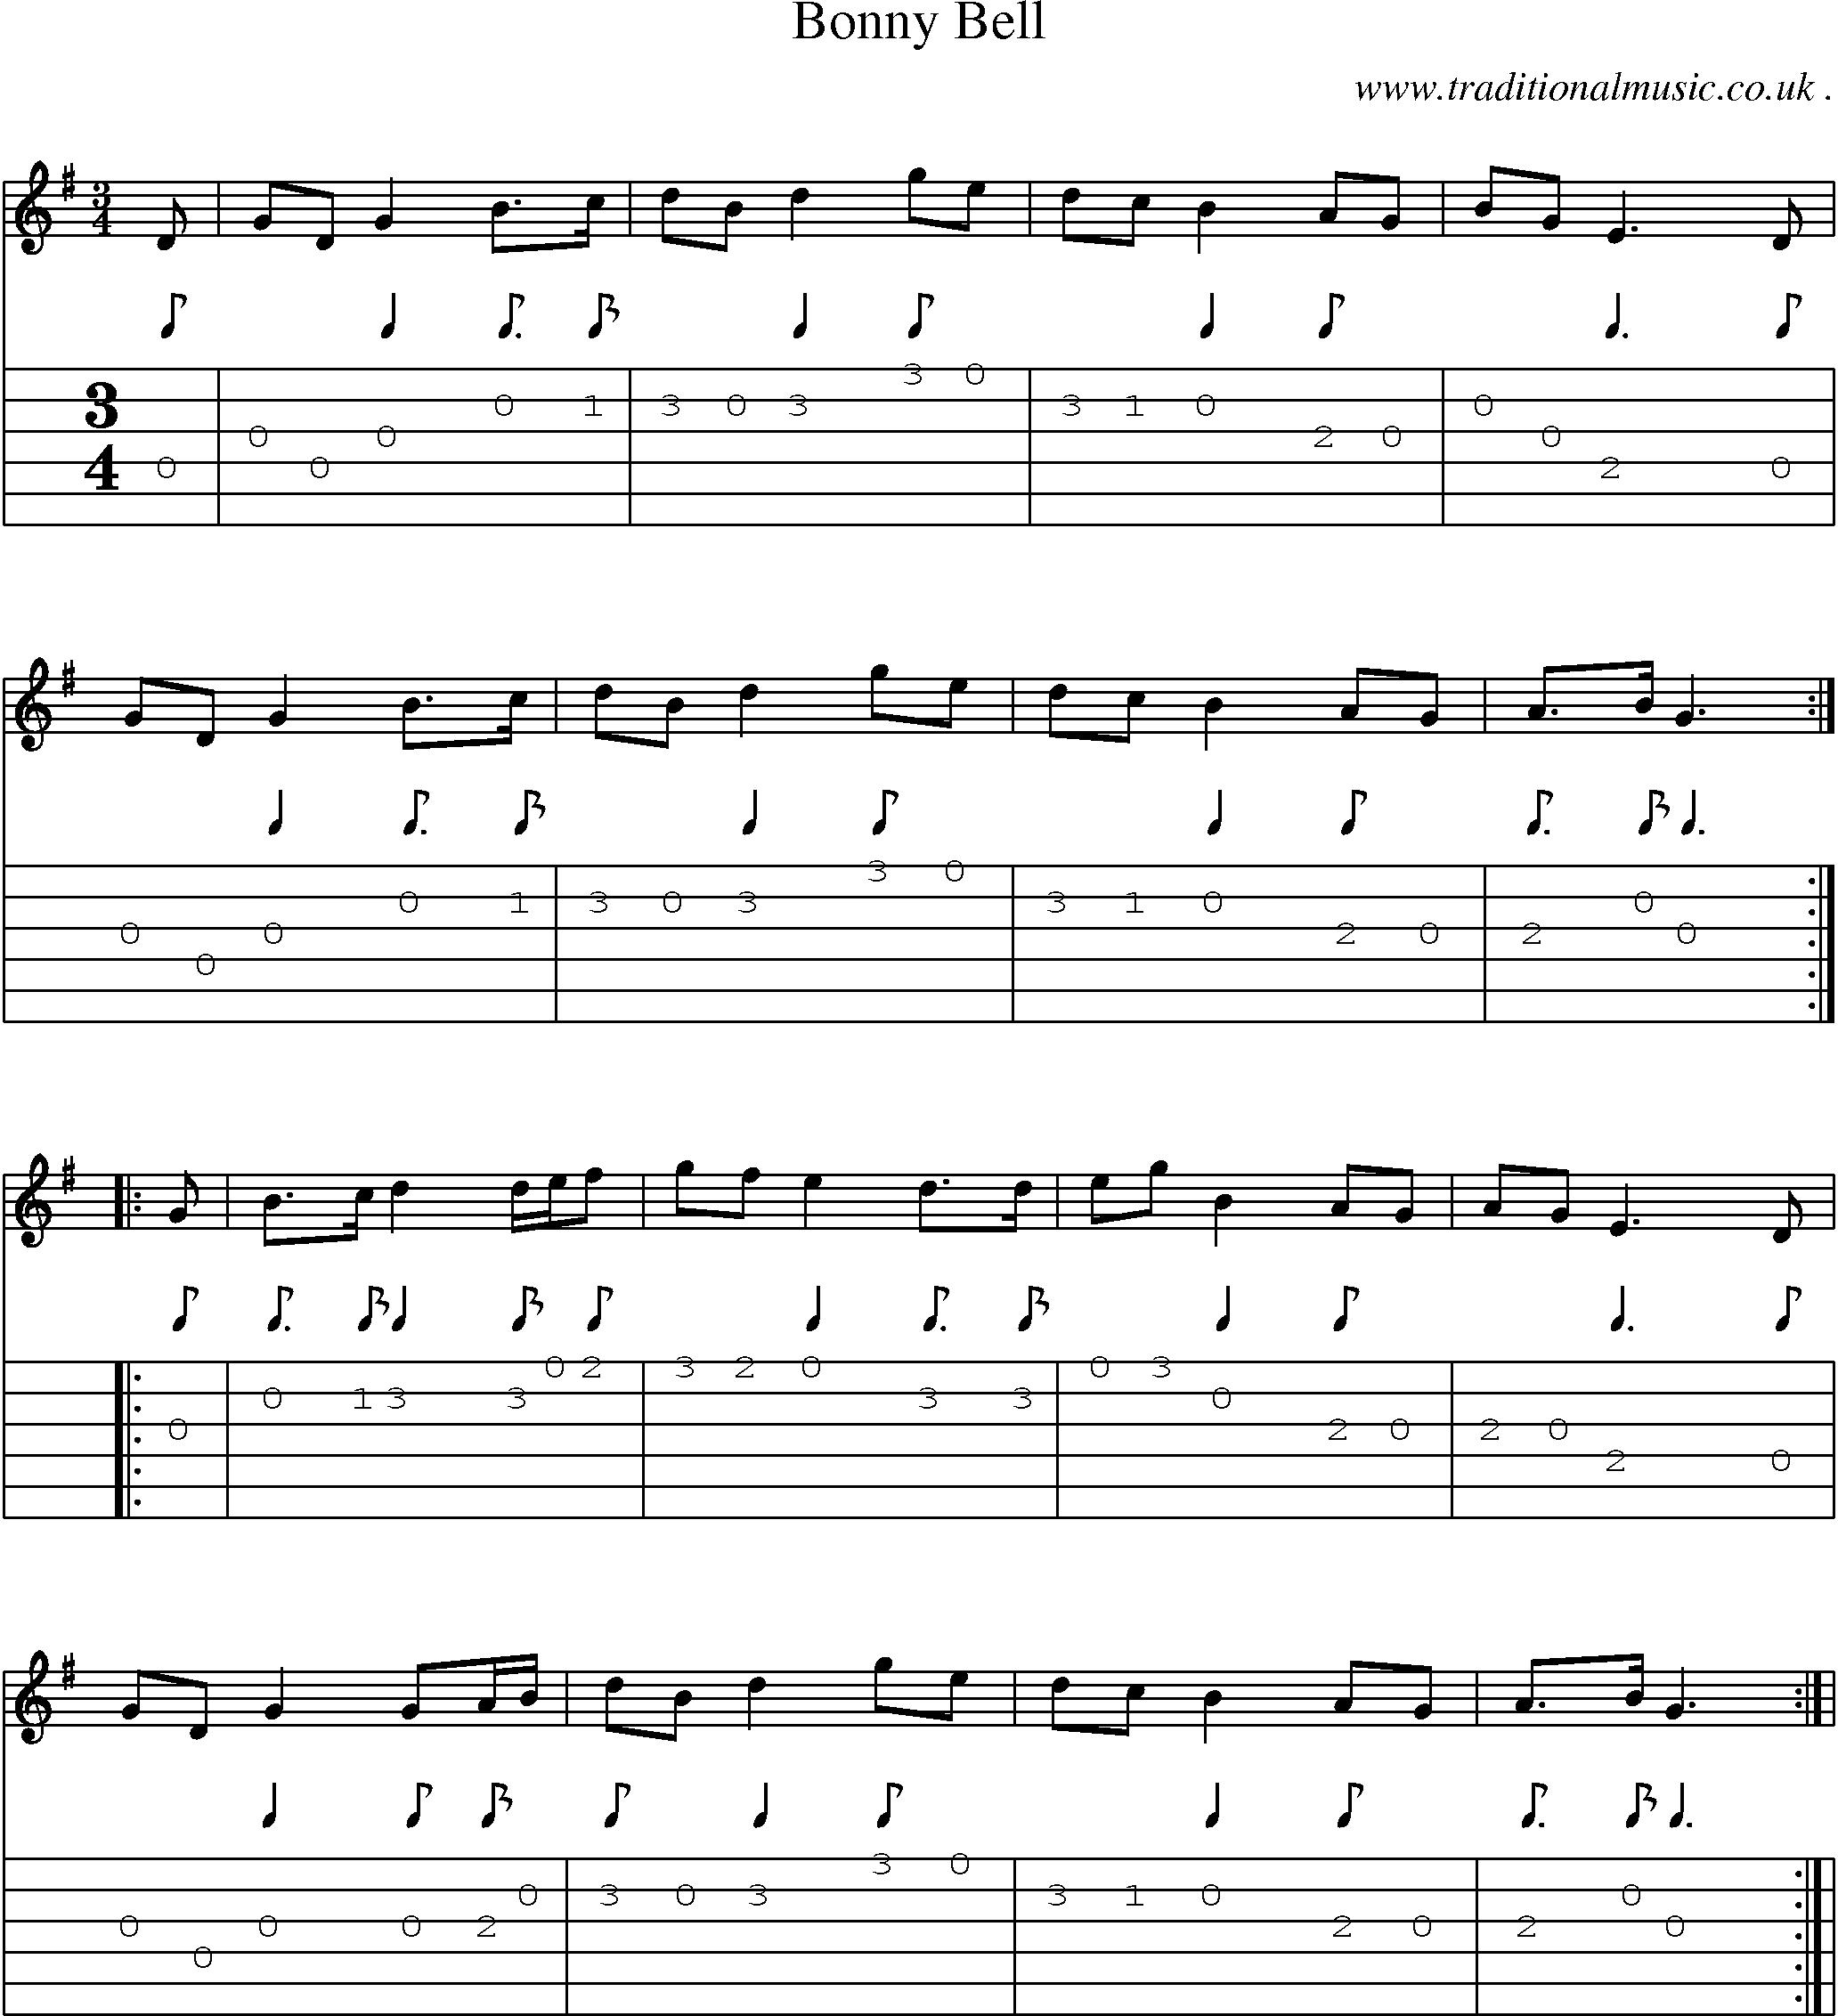 Sheet-Music and Guitar Tabs for Bonny Bell